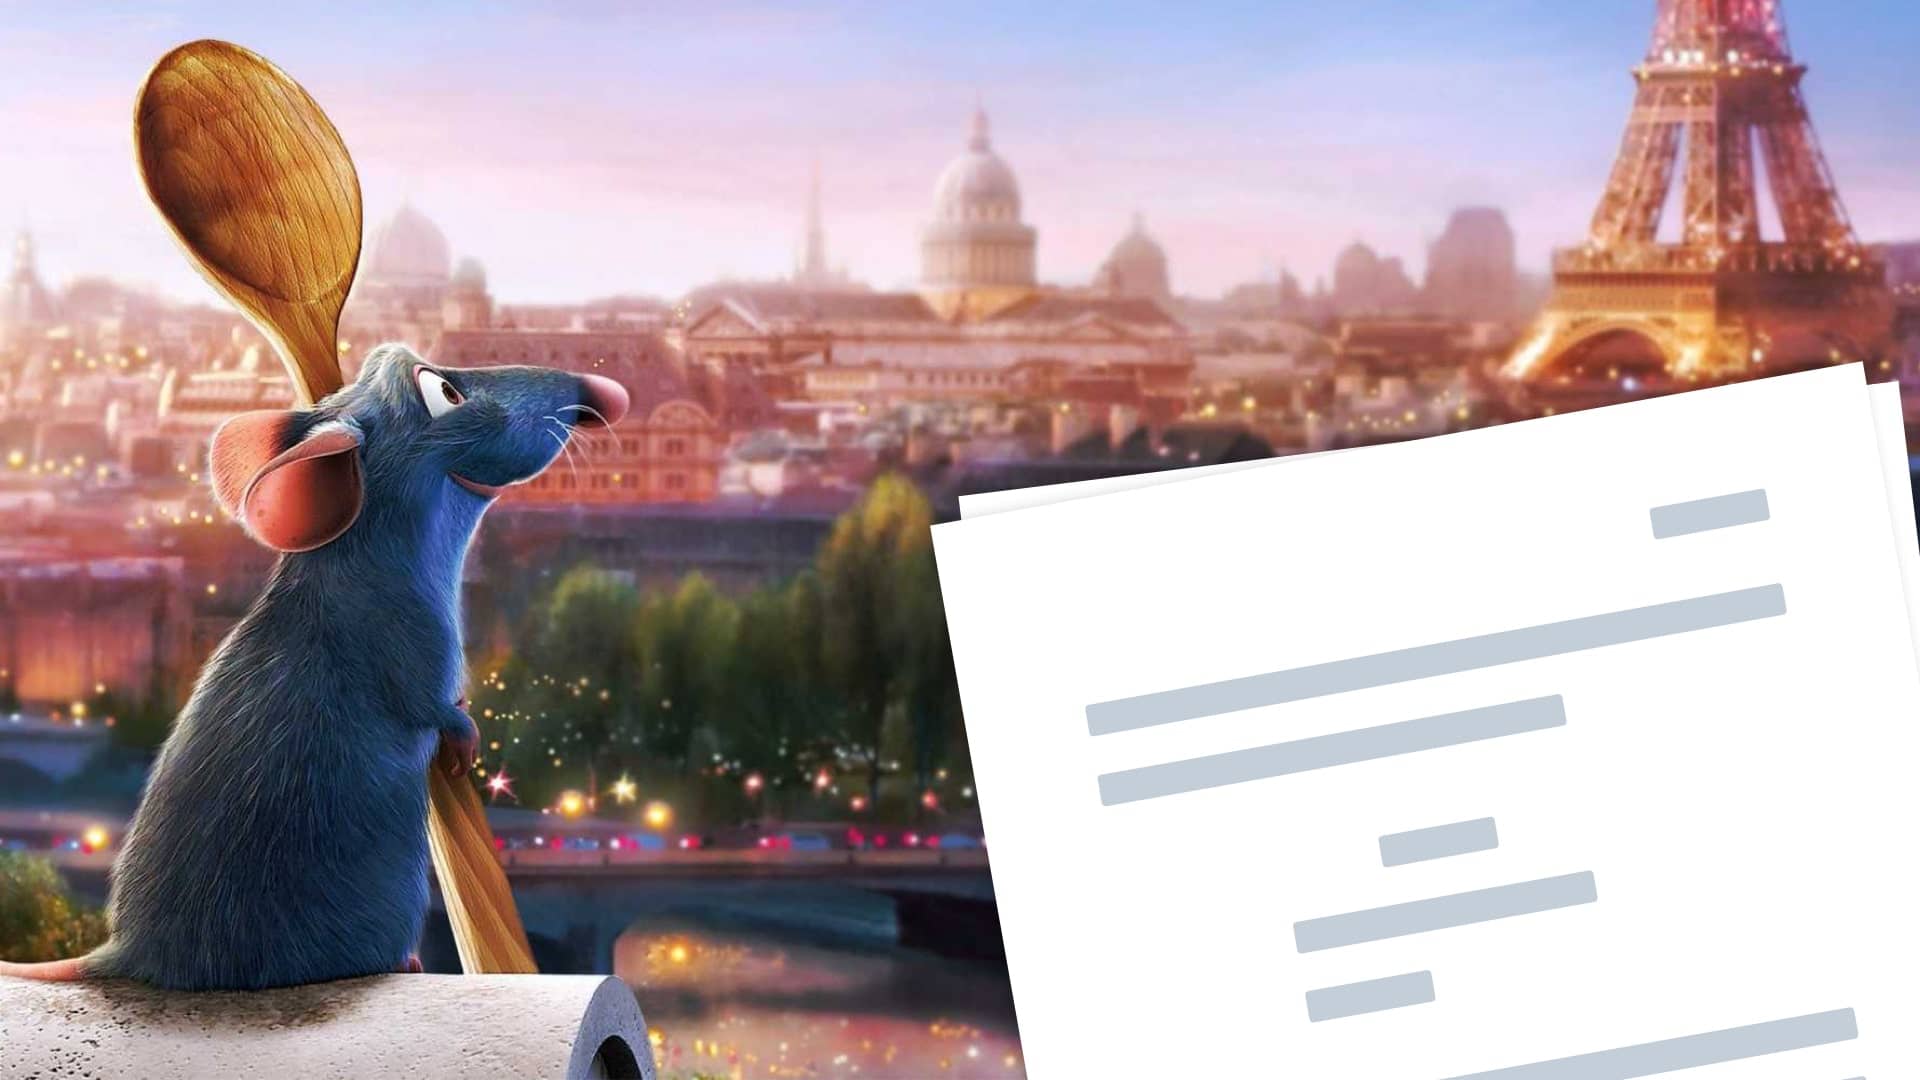 Ratatouille Script PDF Download, Plot, Characters, and Ending - Featured